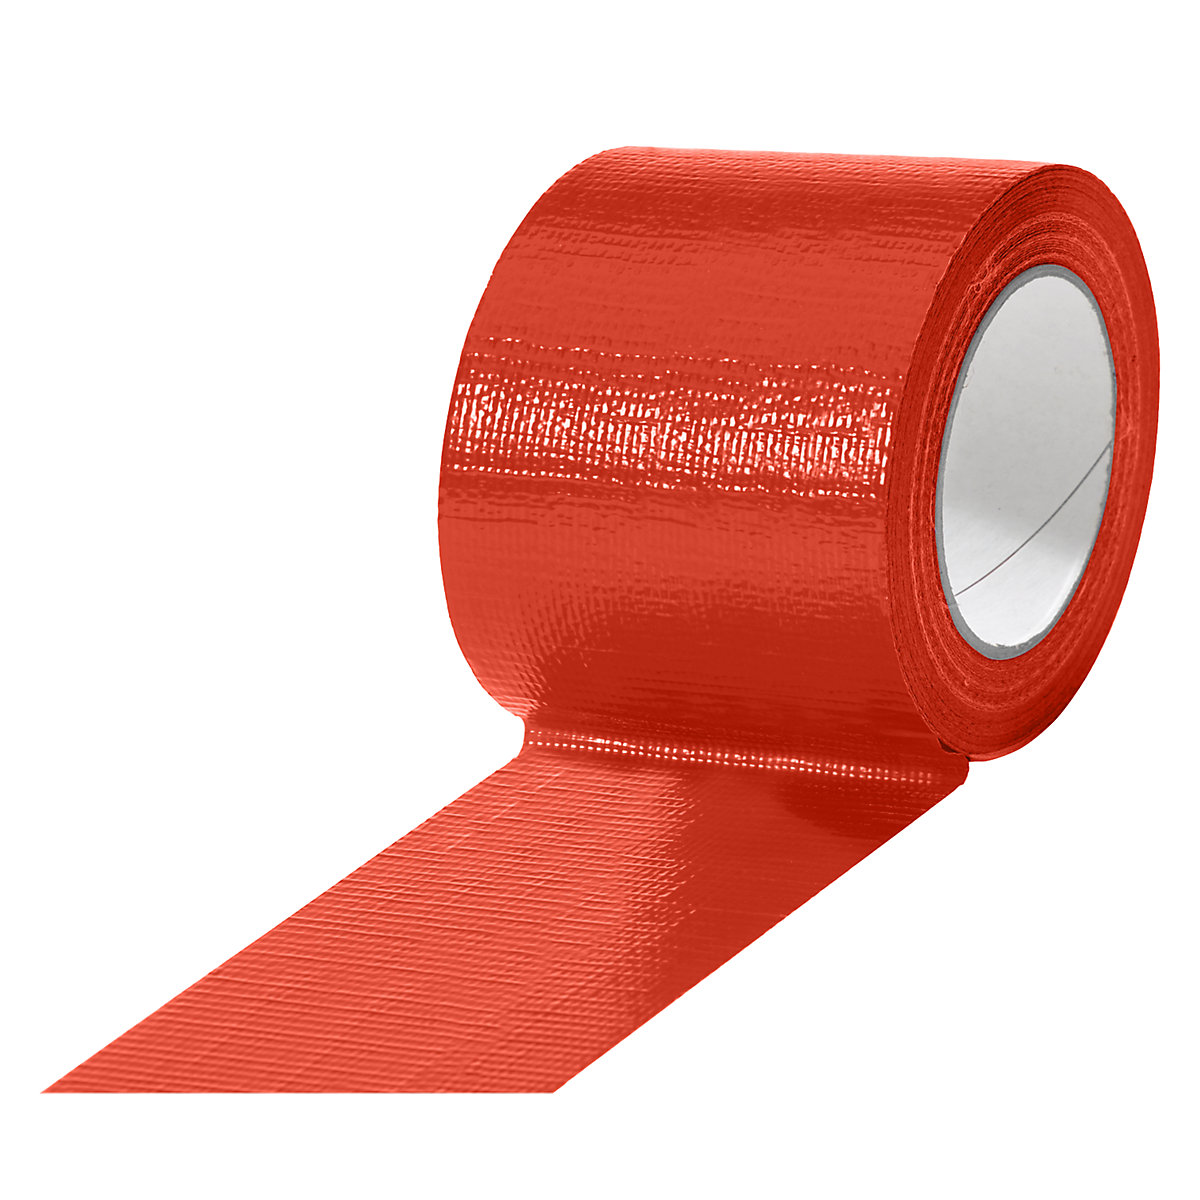 Fabric tape, in different colours, pack of 12 rolls, red, tape width 75 mm-1